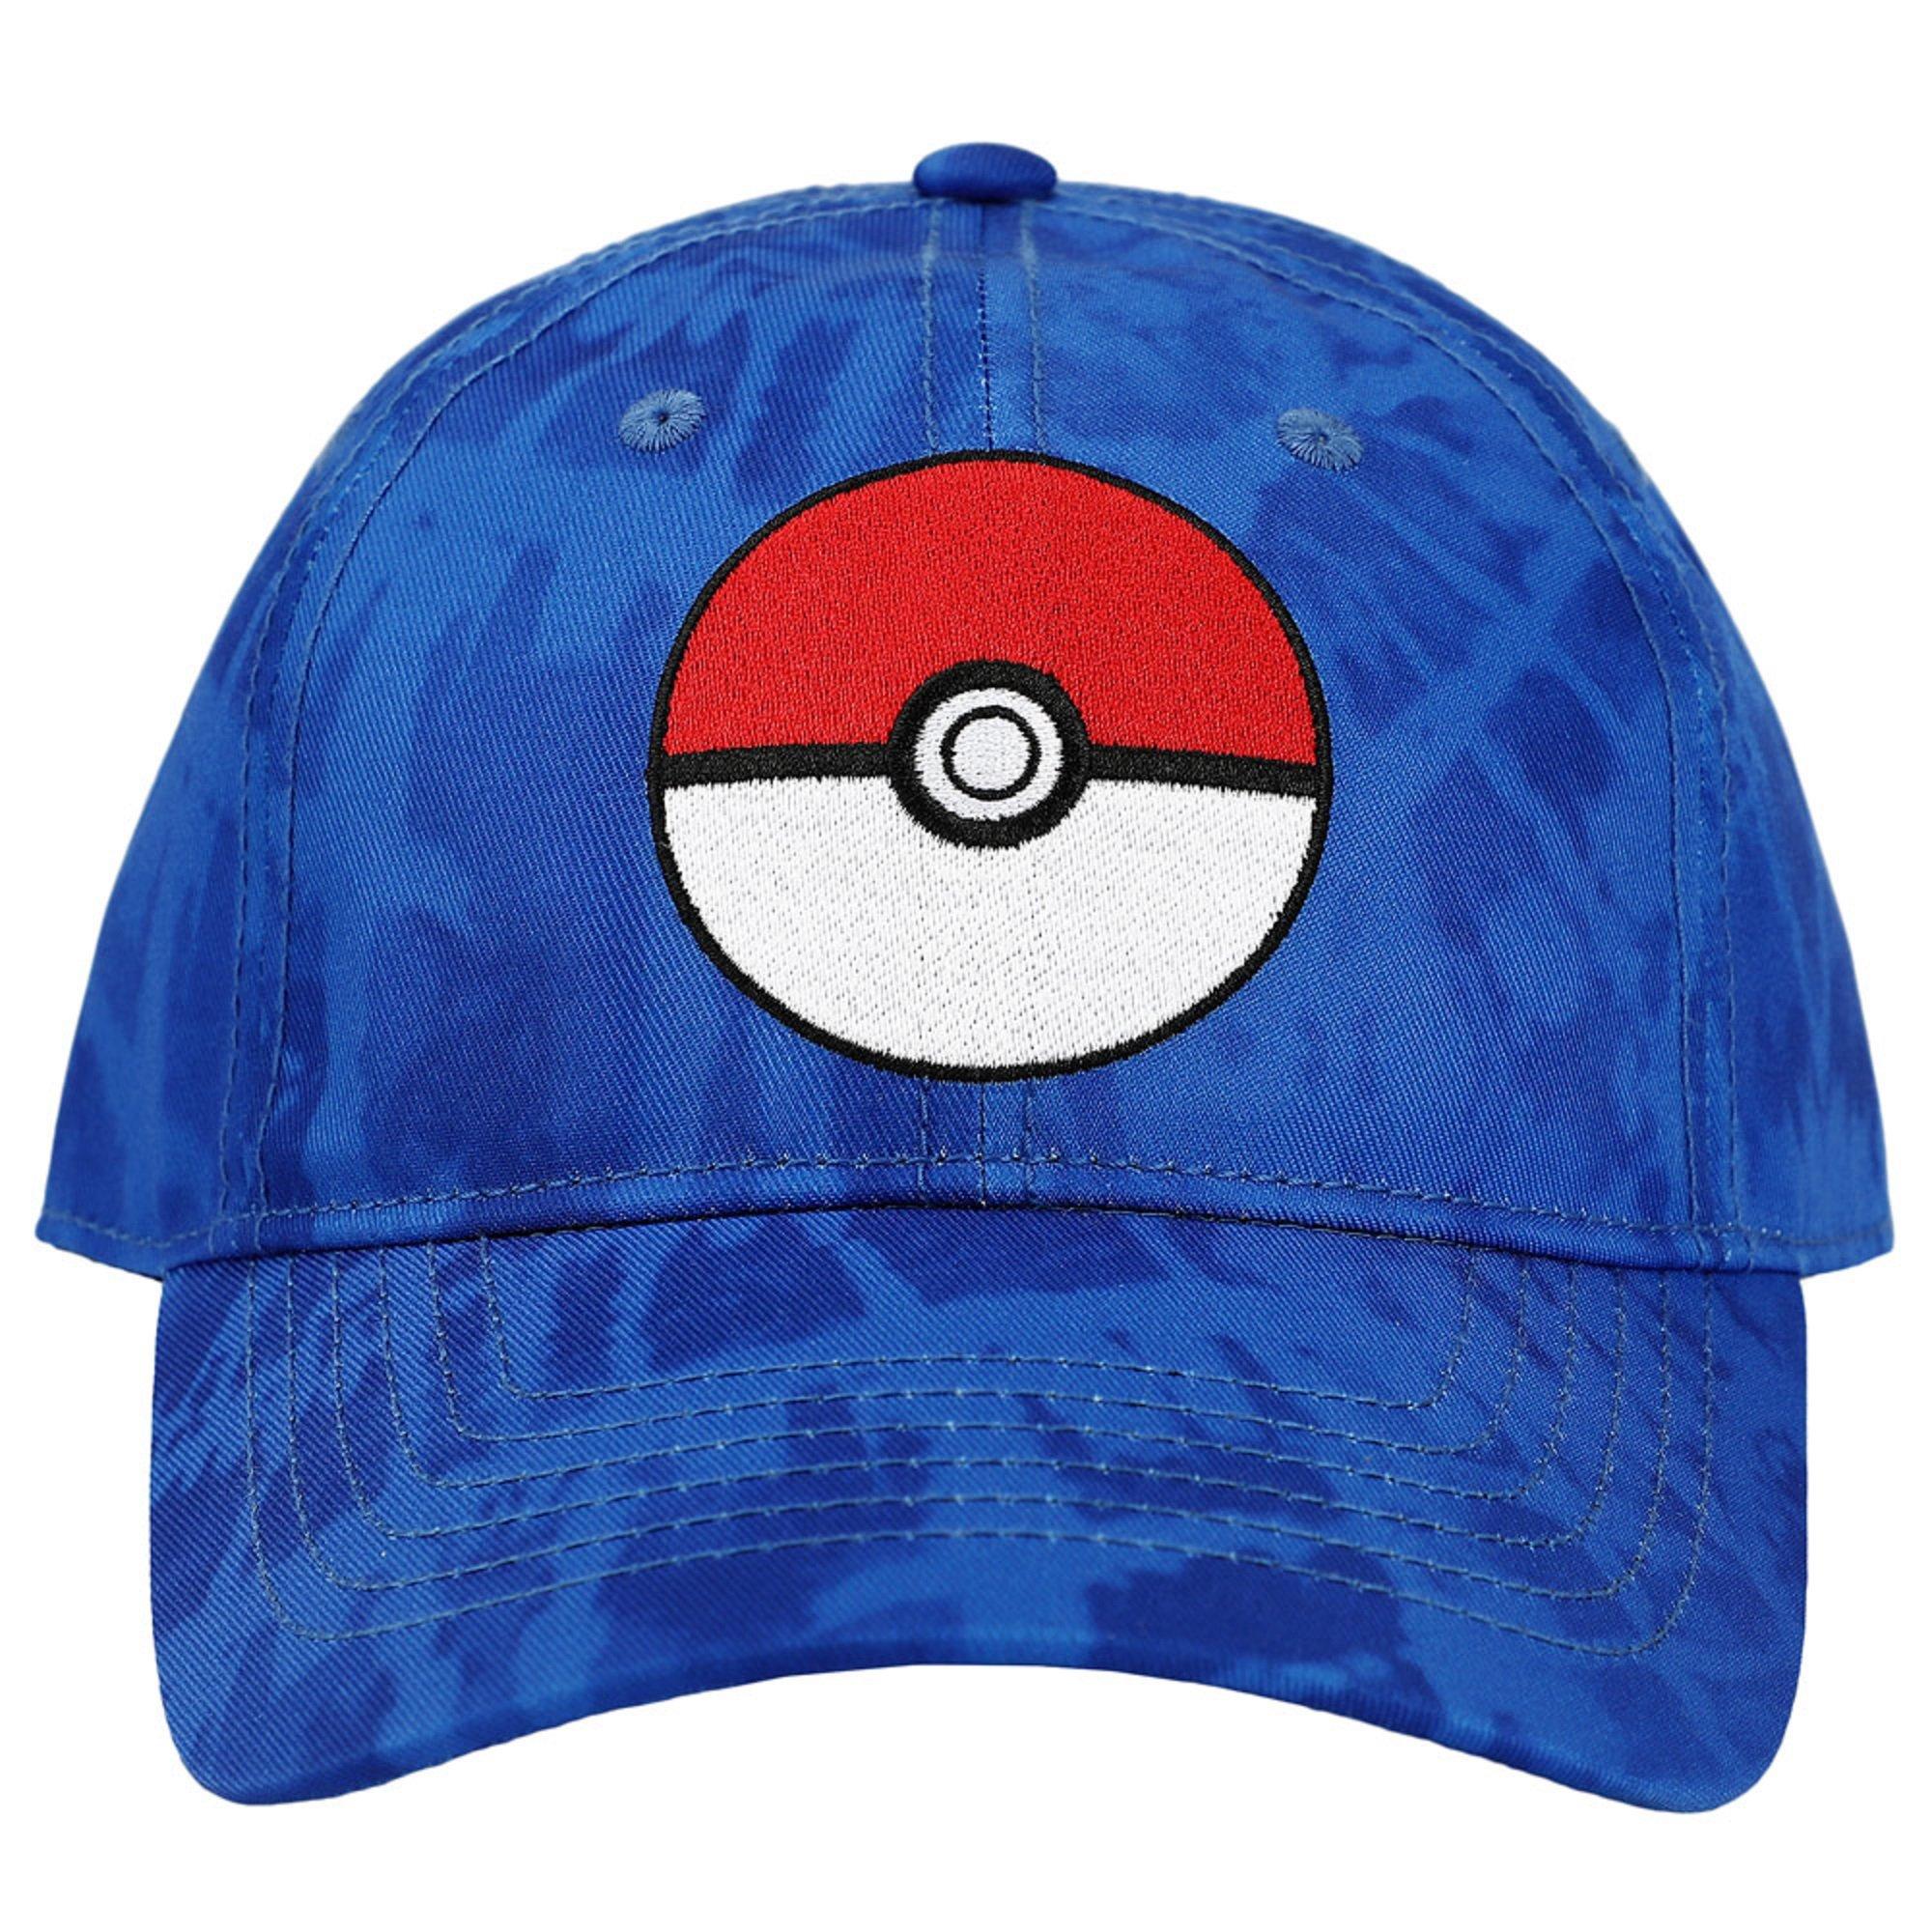 Poki - And the games from which the hats are: 1: Pokémon. 2: Mario